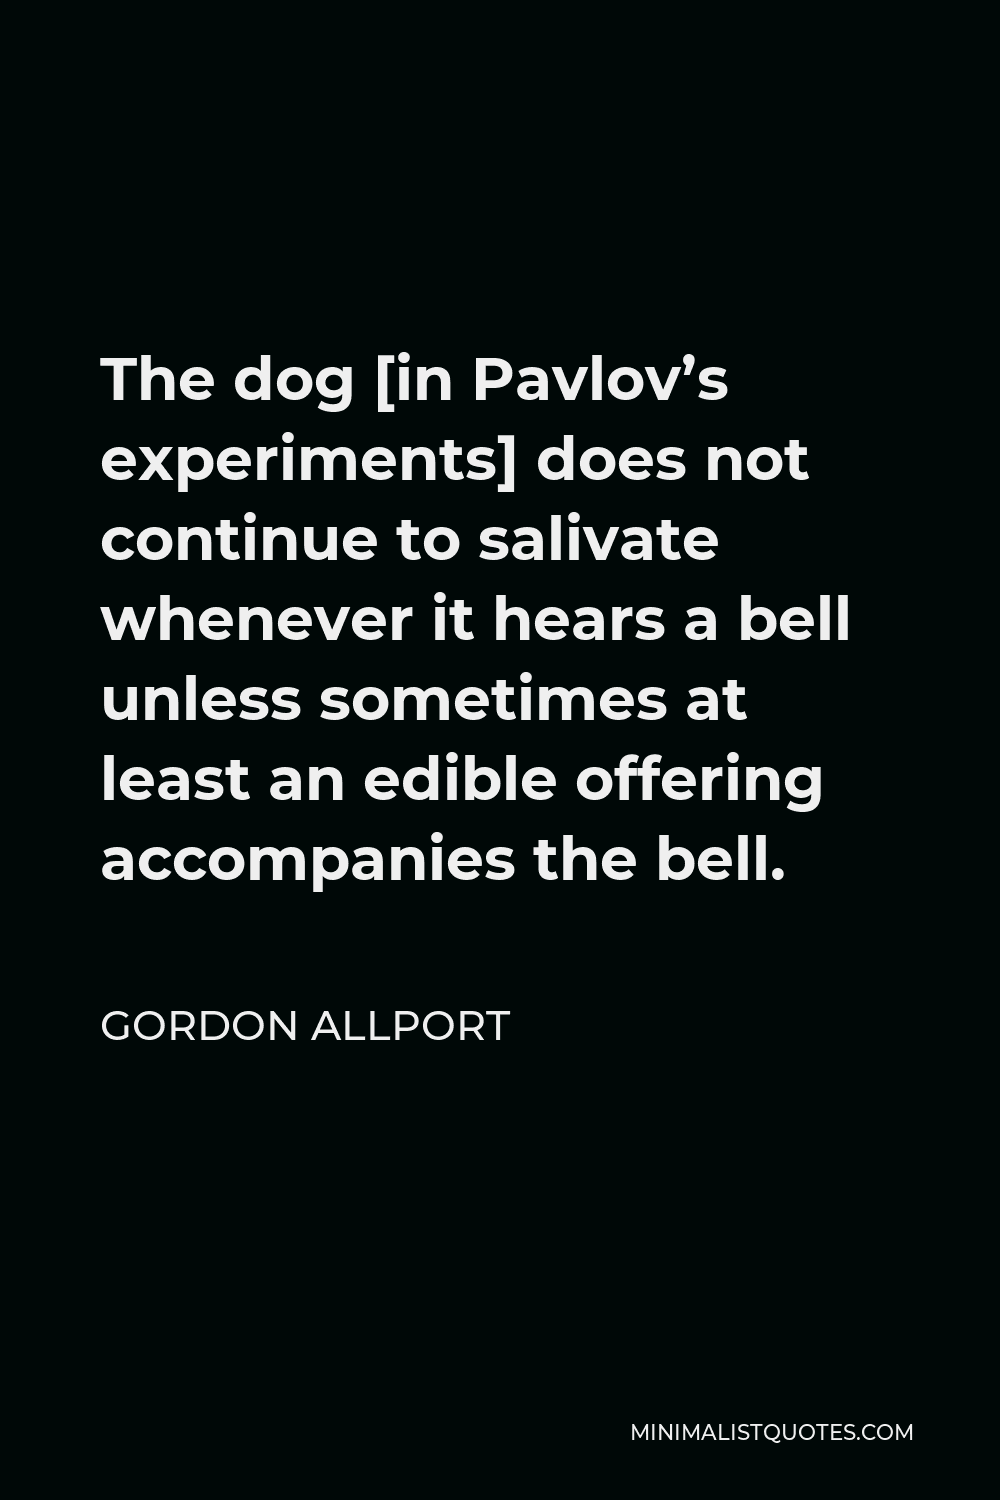 Gordon Allport Quote - The dog [in Pavlov’s experiments] does not continue to salivate whenever it hears a bell unless sometimes at least an edible offering accompanies the bell.